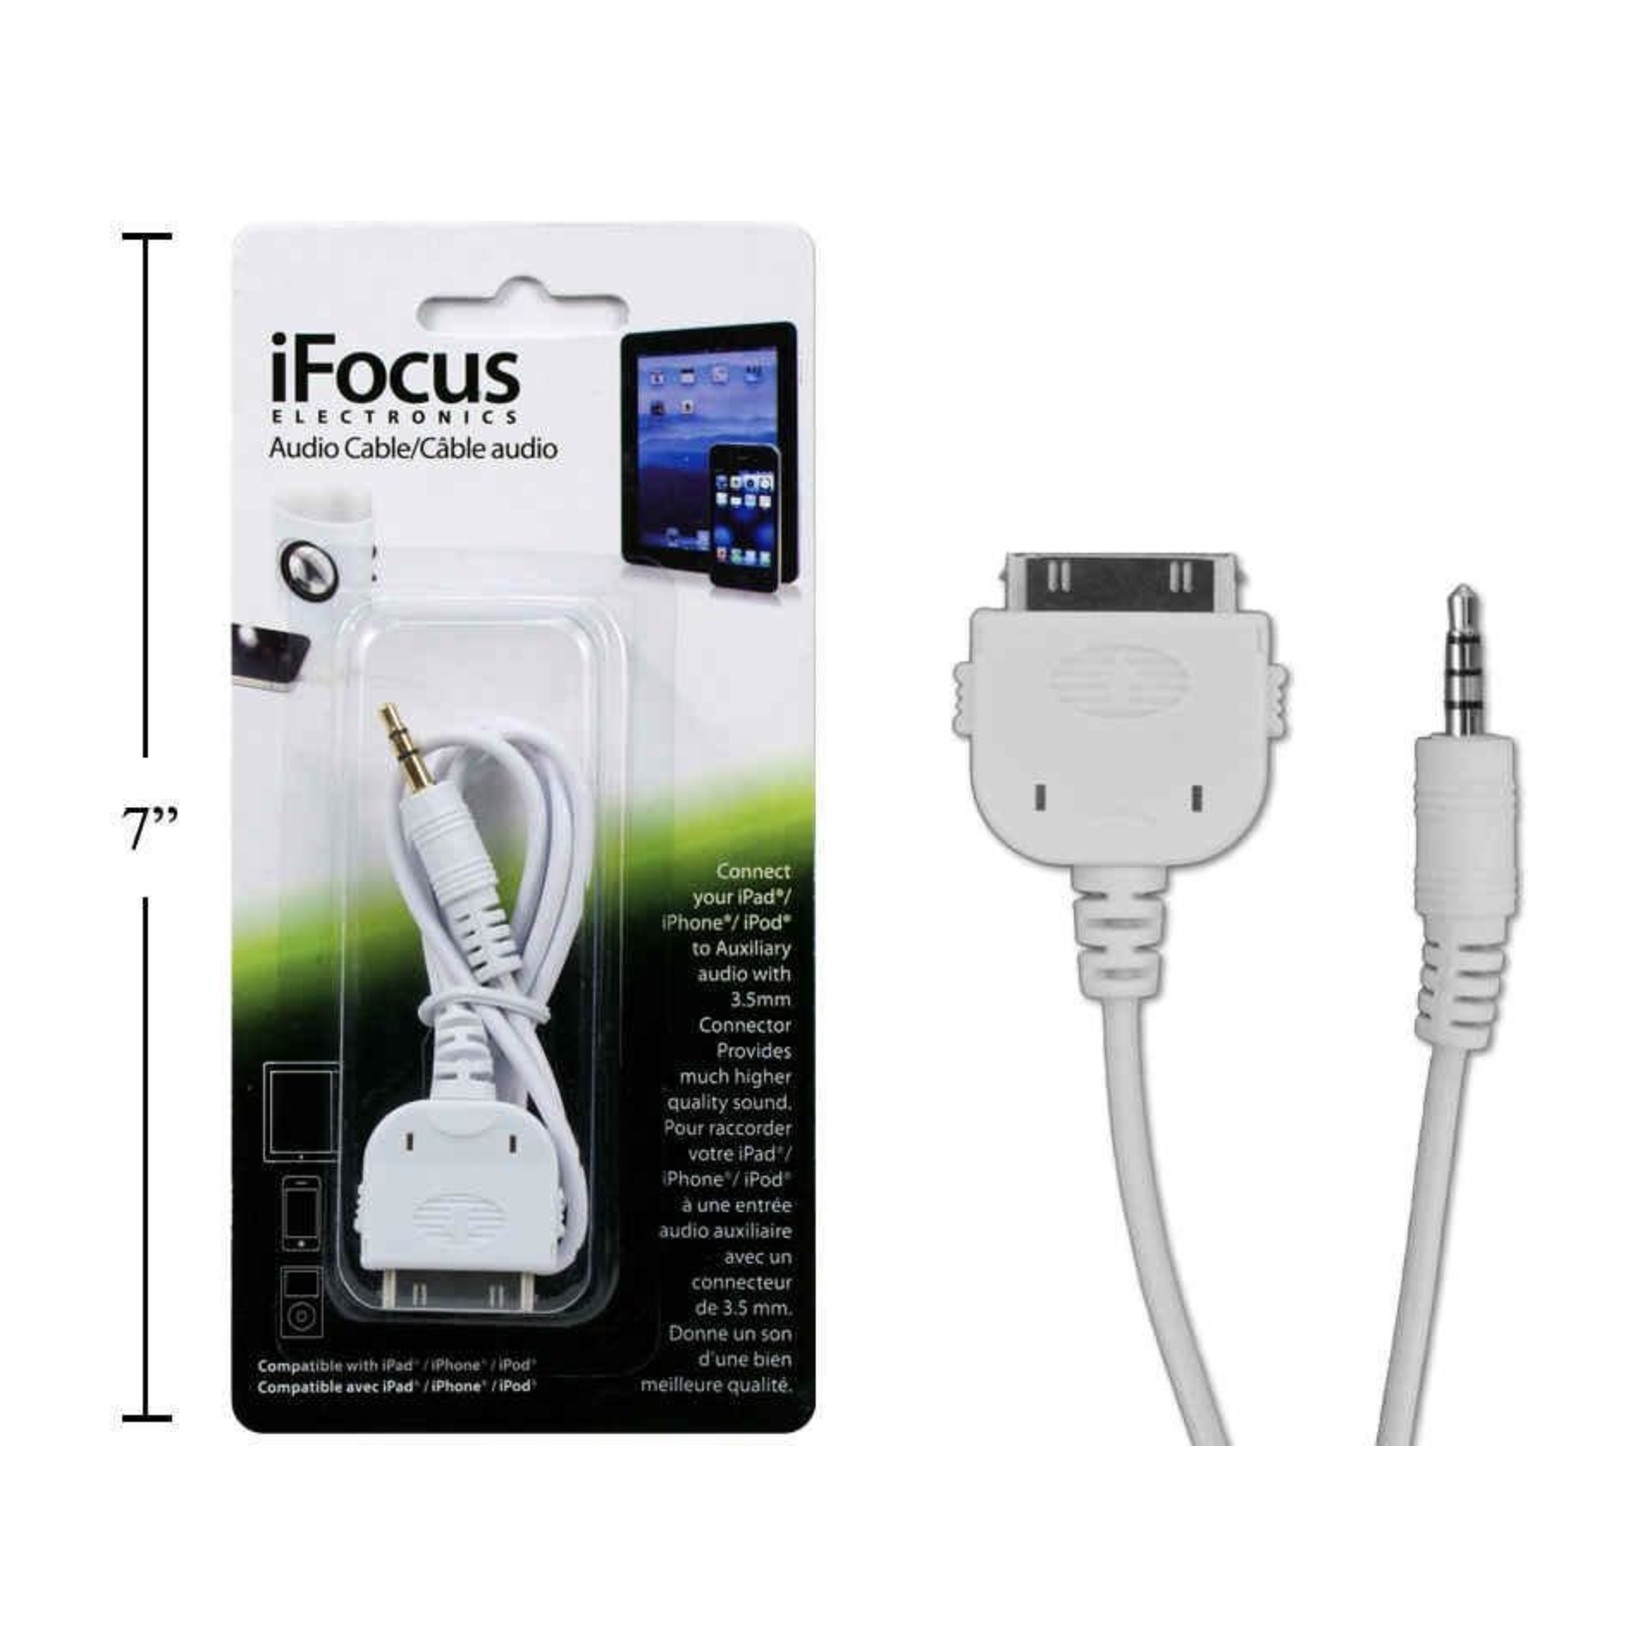 EXTENSION CABLE FOR IPAD/IPHONE/IPOD